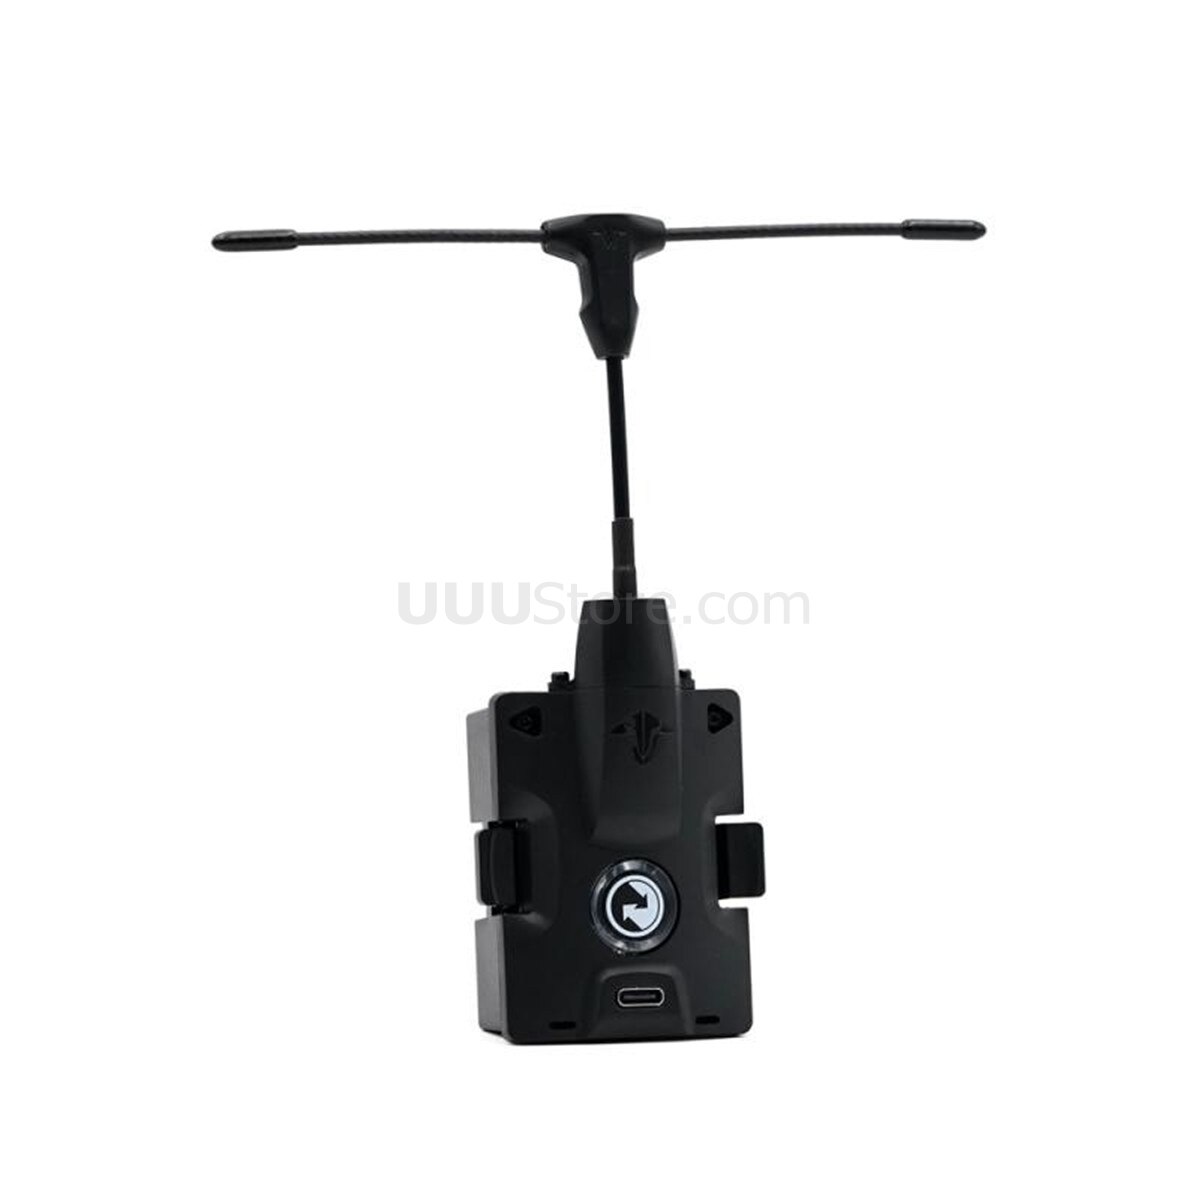 TBS Crossfire Micro Transmitter 915/868Mhz V2 RC Drone